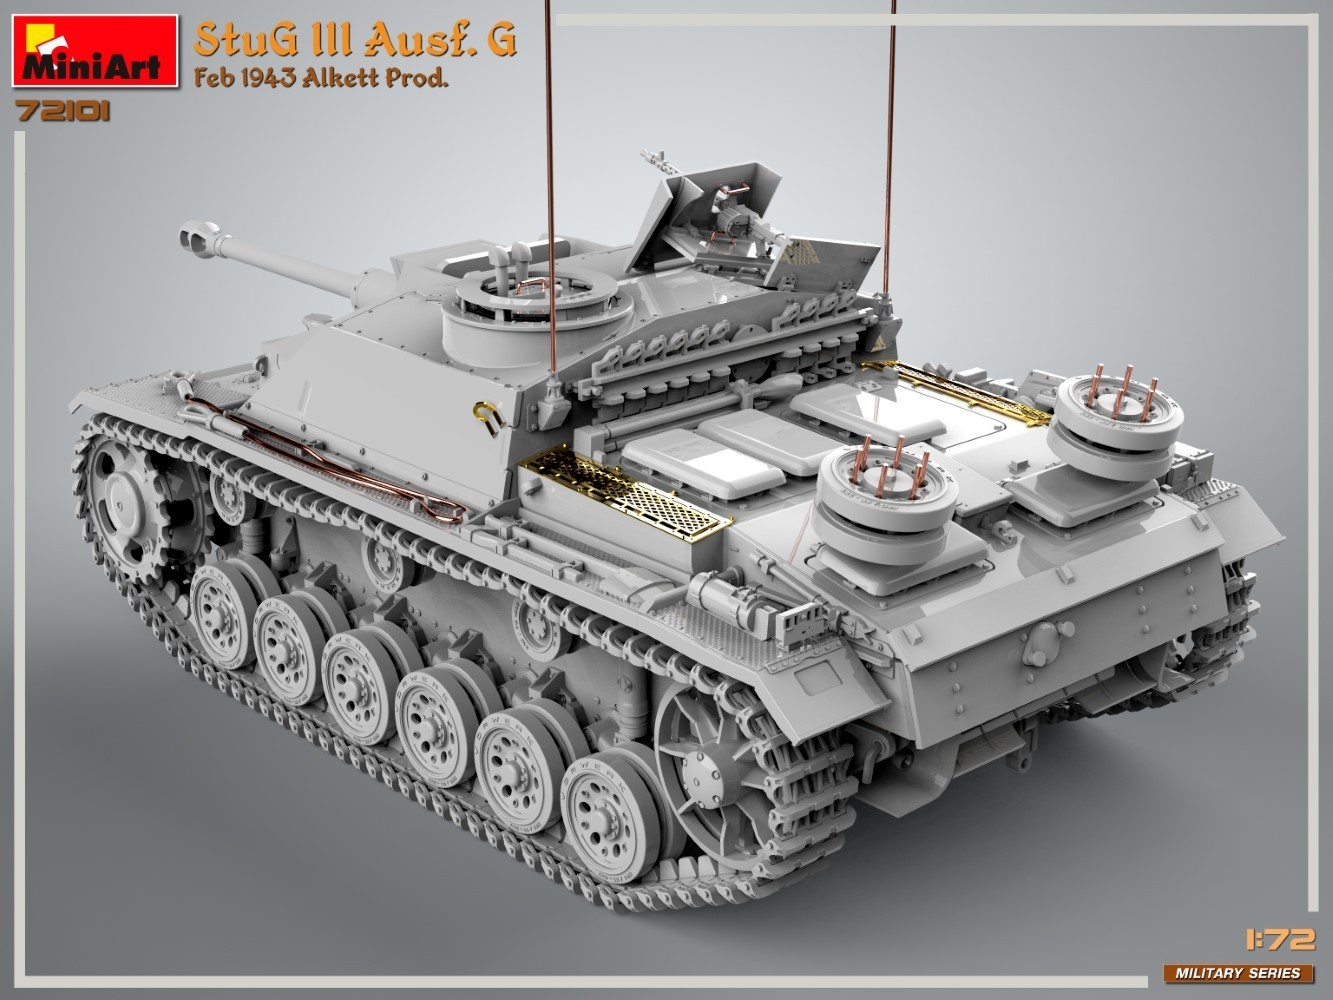 New Military Series Announced in 1/72 Scale, Starting with StuG III Ausf. G CAD-4